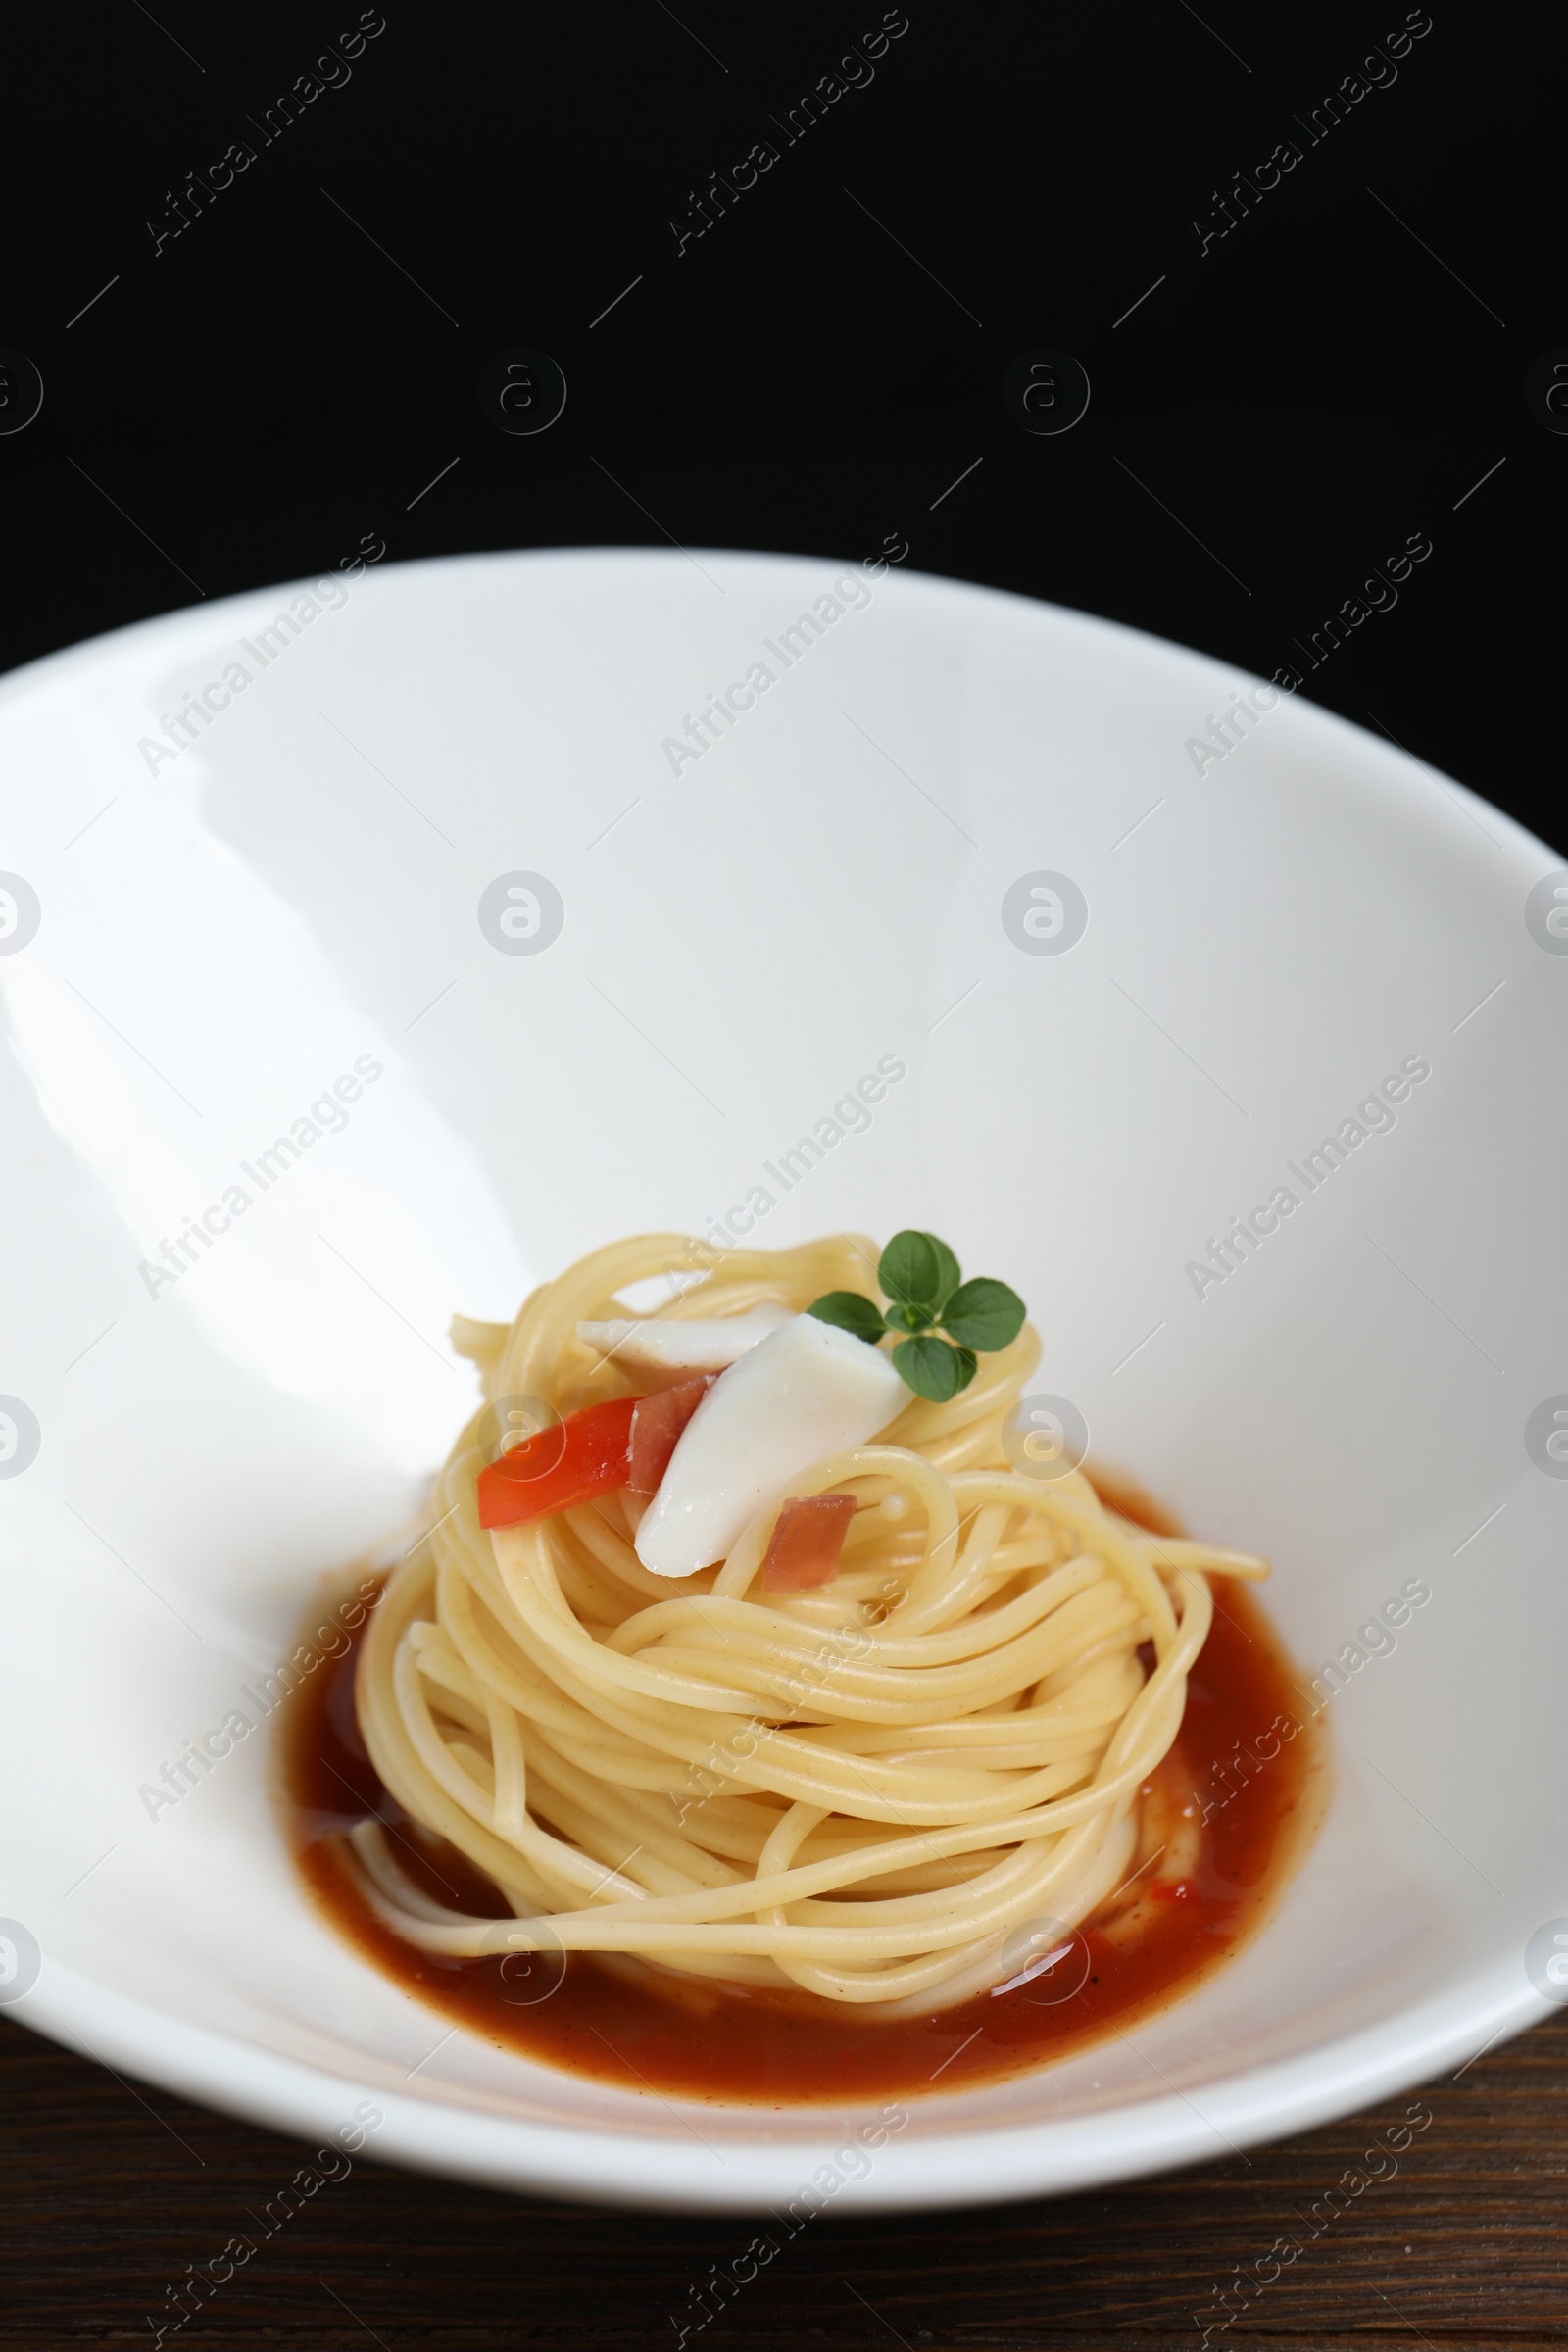 Photo of Tasty spaghetti with sauce on wooden table, closeup. Exquisite presentation of pasta dish